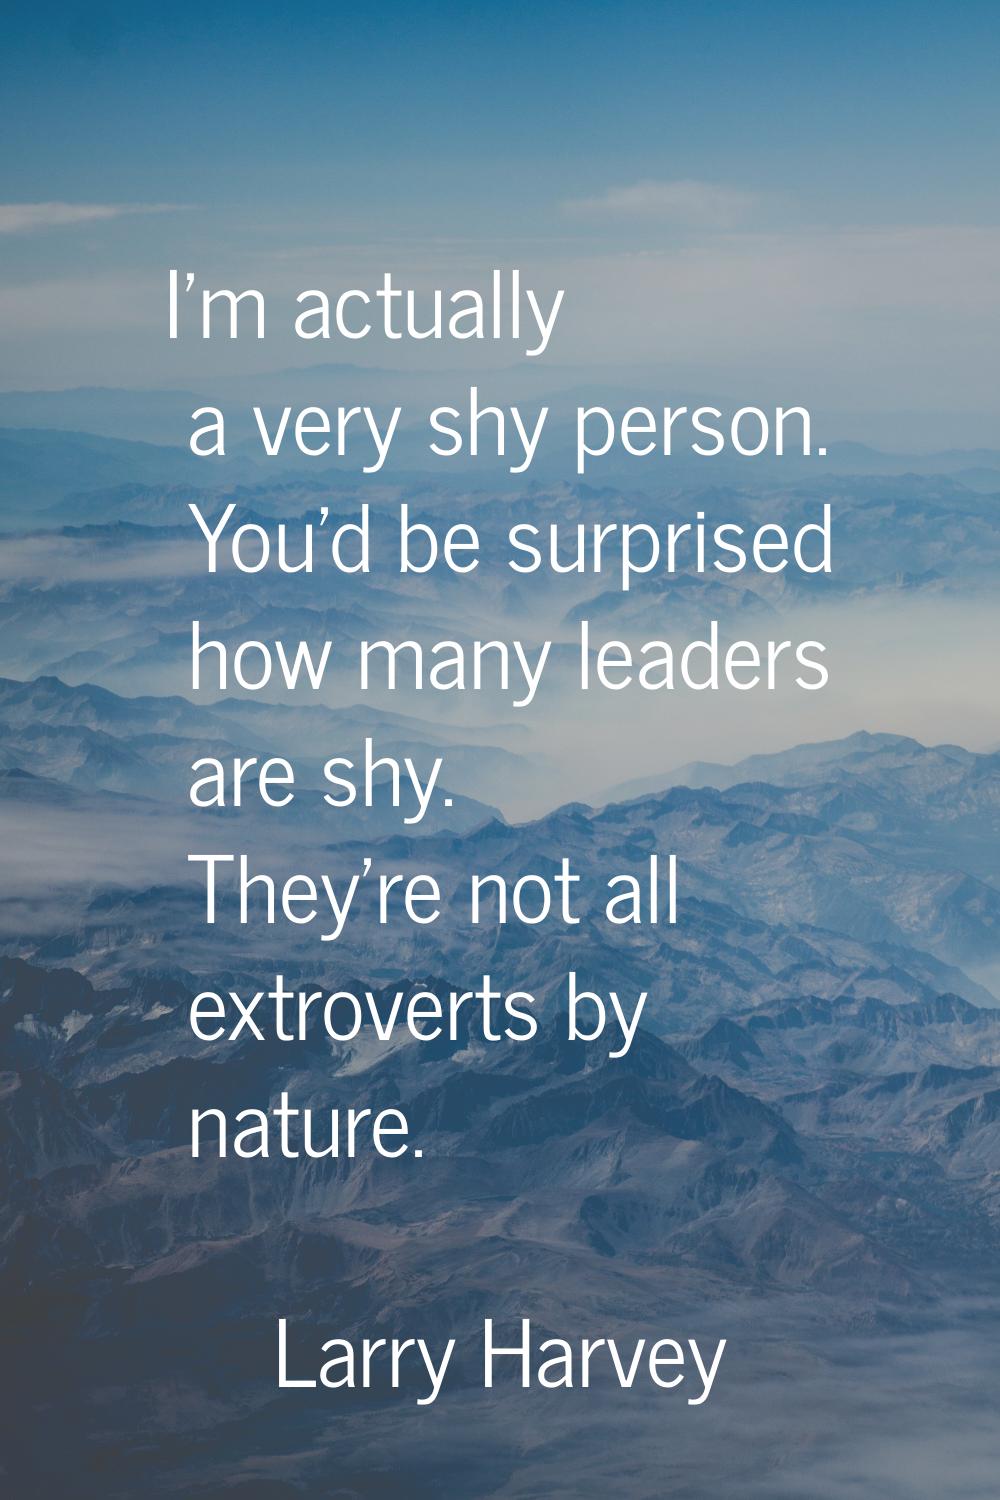 I'm actually a very shy person. You'd be surprised how many leaders are shy. They're not all extrov